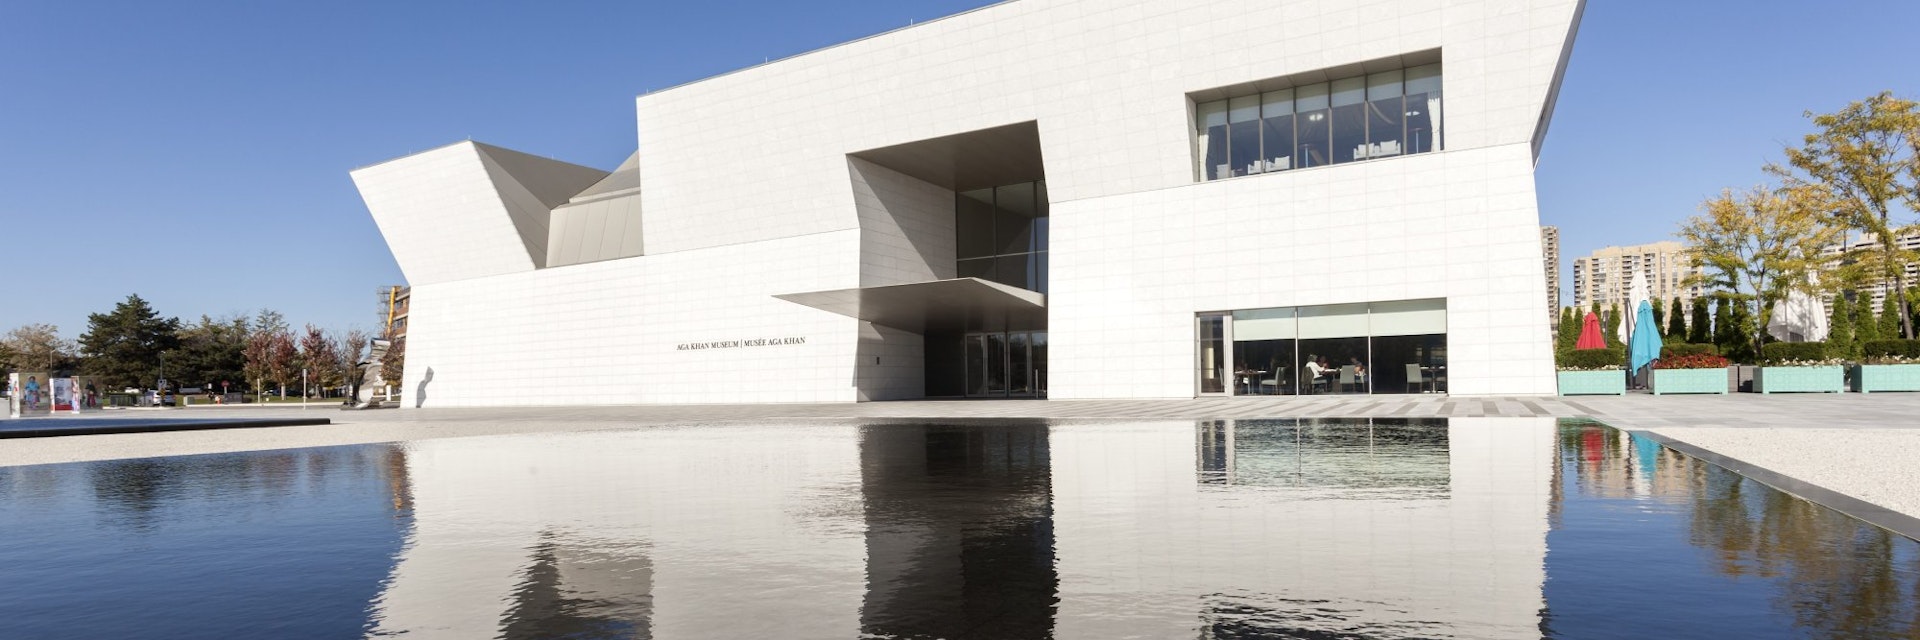 Toronto, Canada - Oct 18, 2017: Exterior view of the Aga Khan Museum in Toronto, Canada; Shutterstock ID 746900509; your: Bridget Brown; gl: 65050; netsuite: Online Editorial; full: POI Image Update